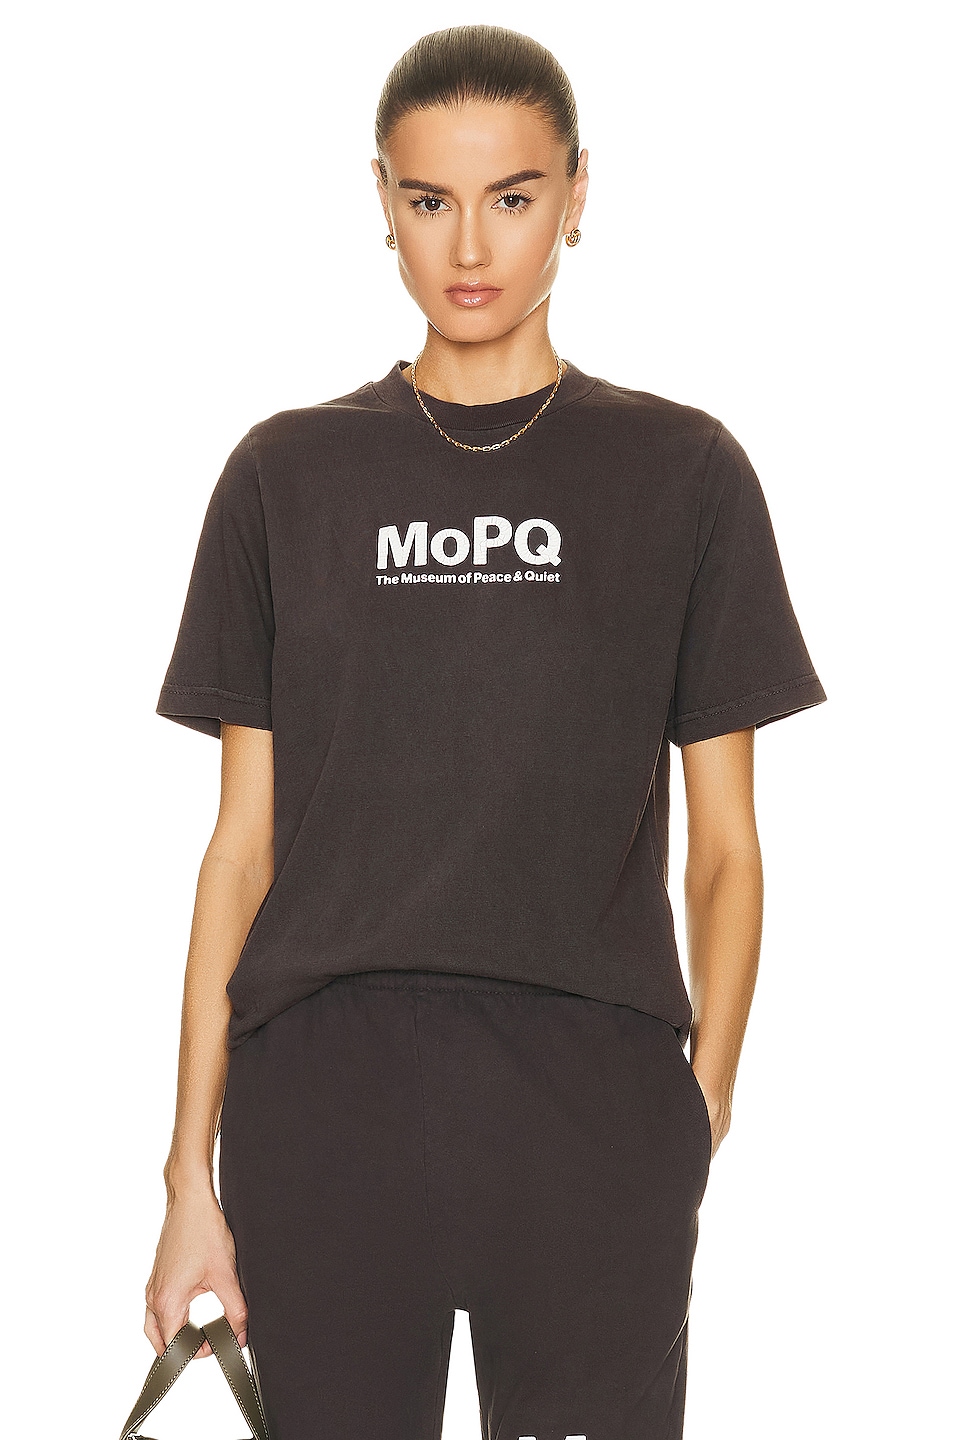 Image 1 of Museum of Peace and Quiet Contemporary Museum T-shirt in Black